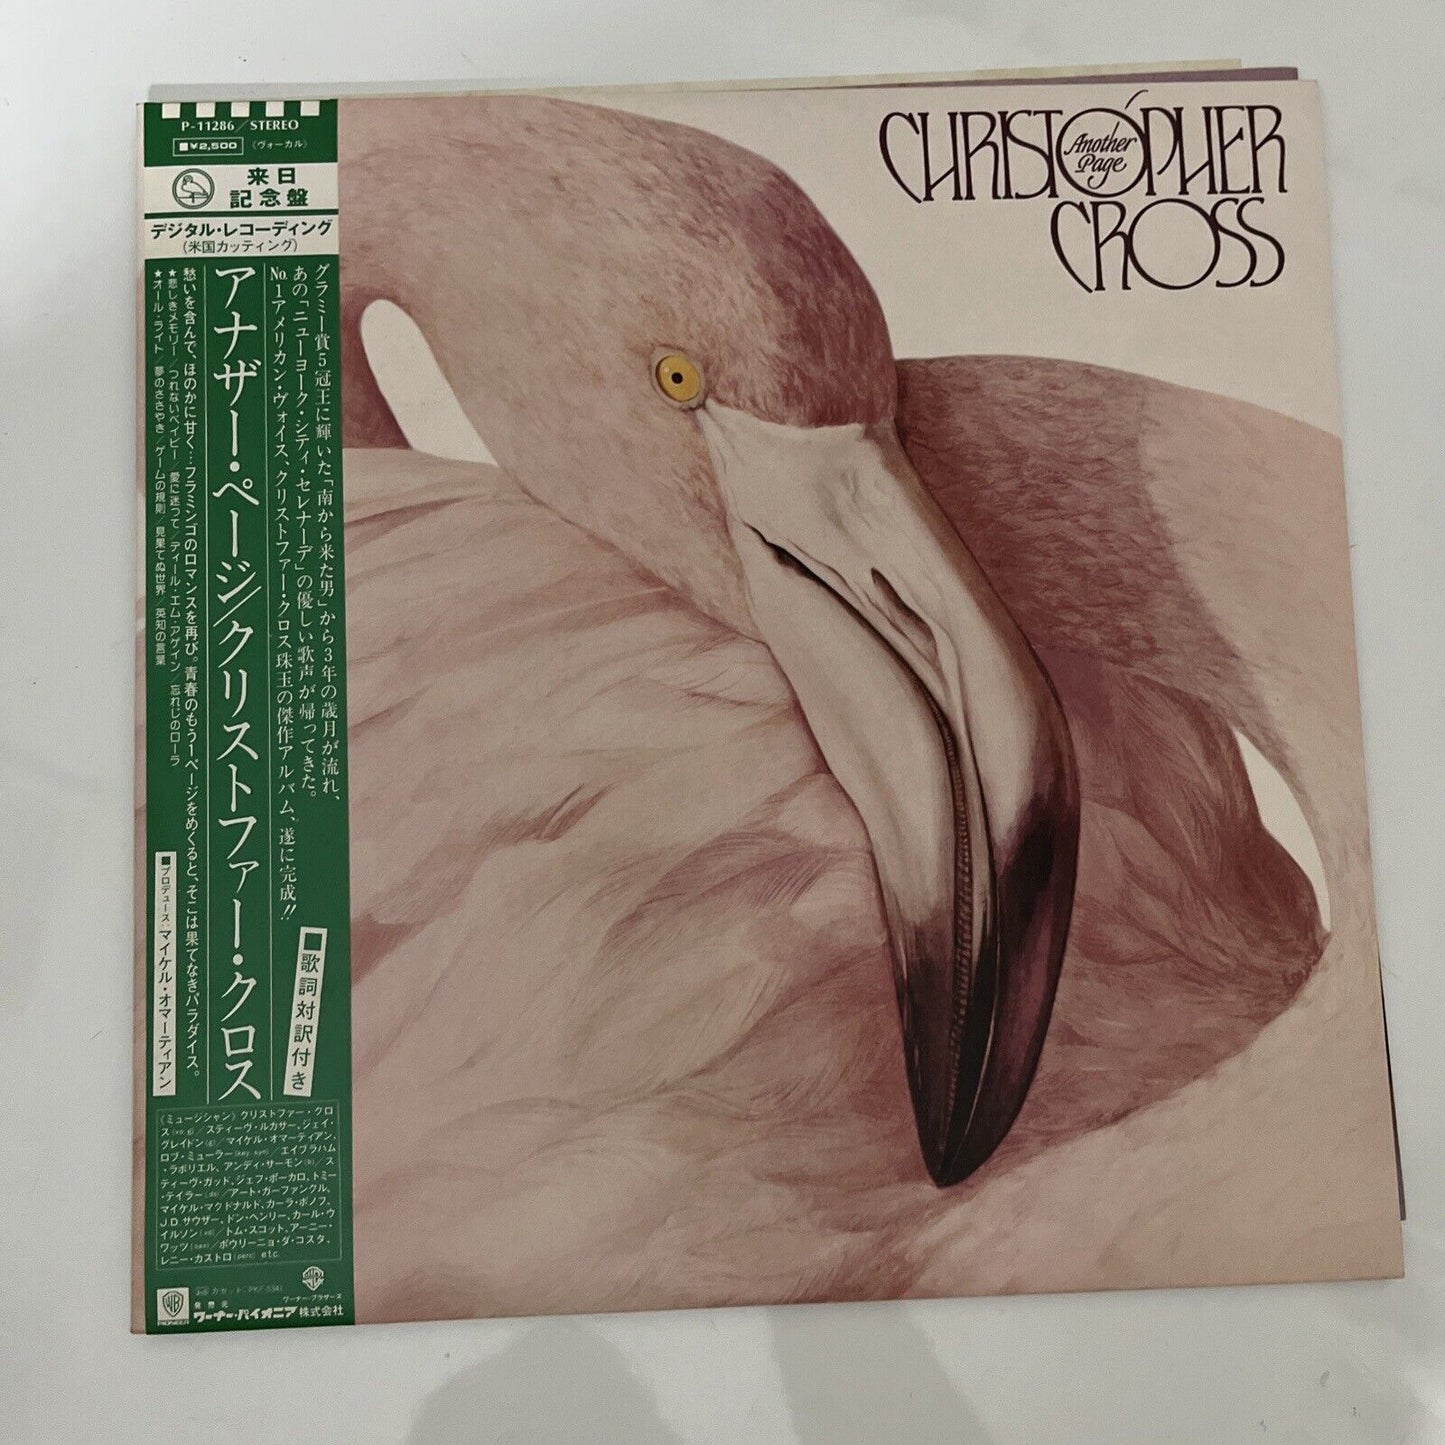 Christopher Cross - Another Stage LP 1983 Vinyl Record Obi P-11286